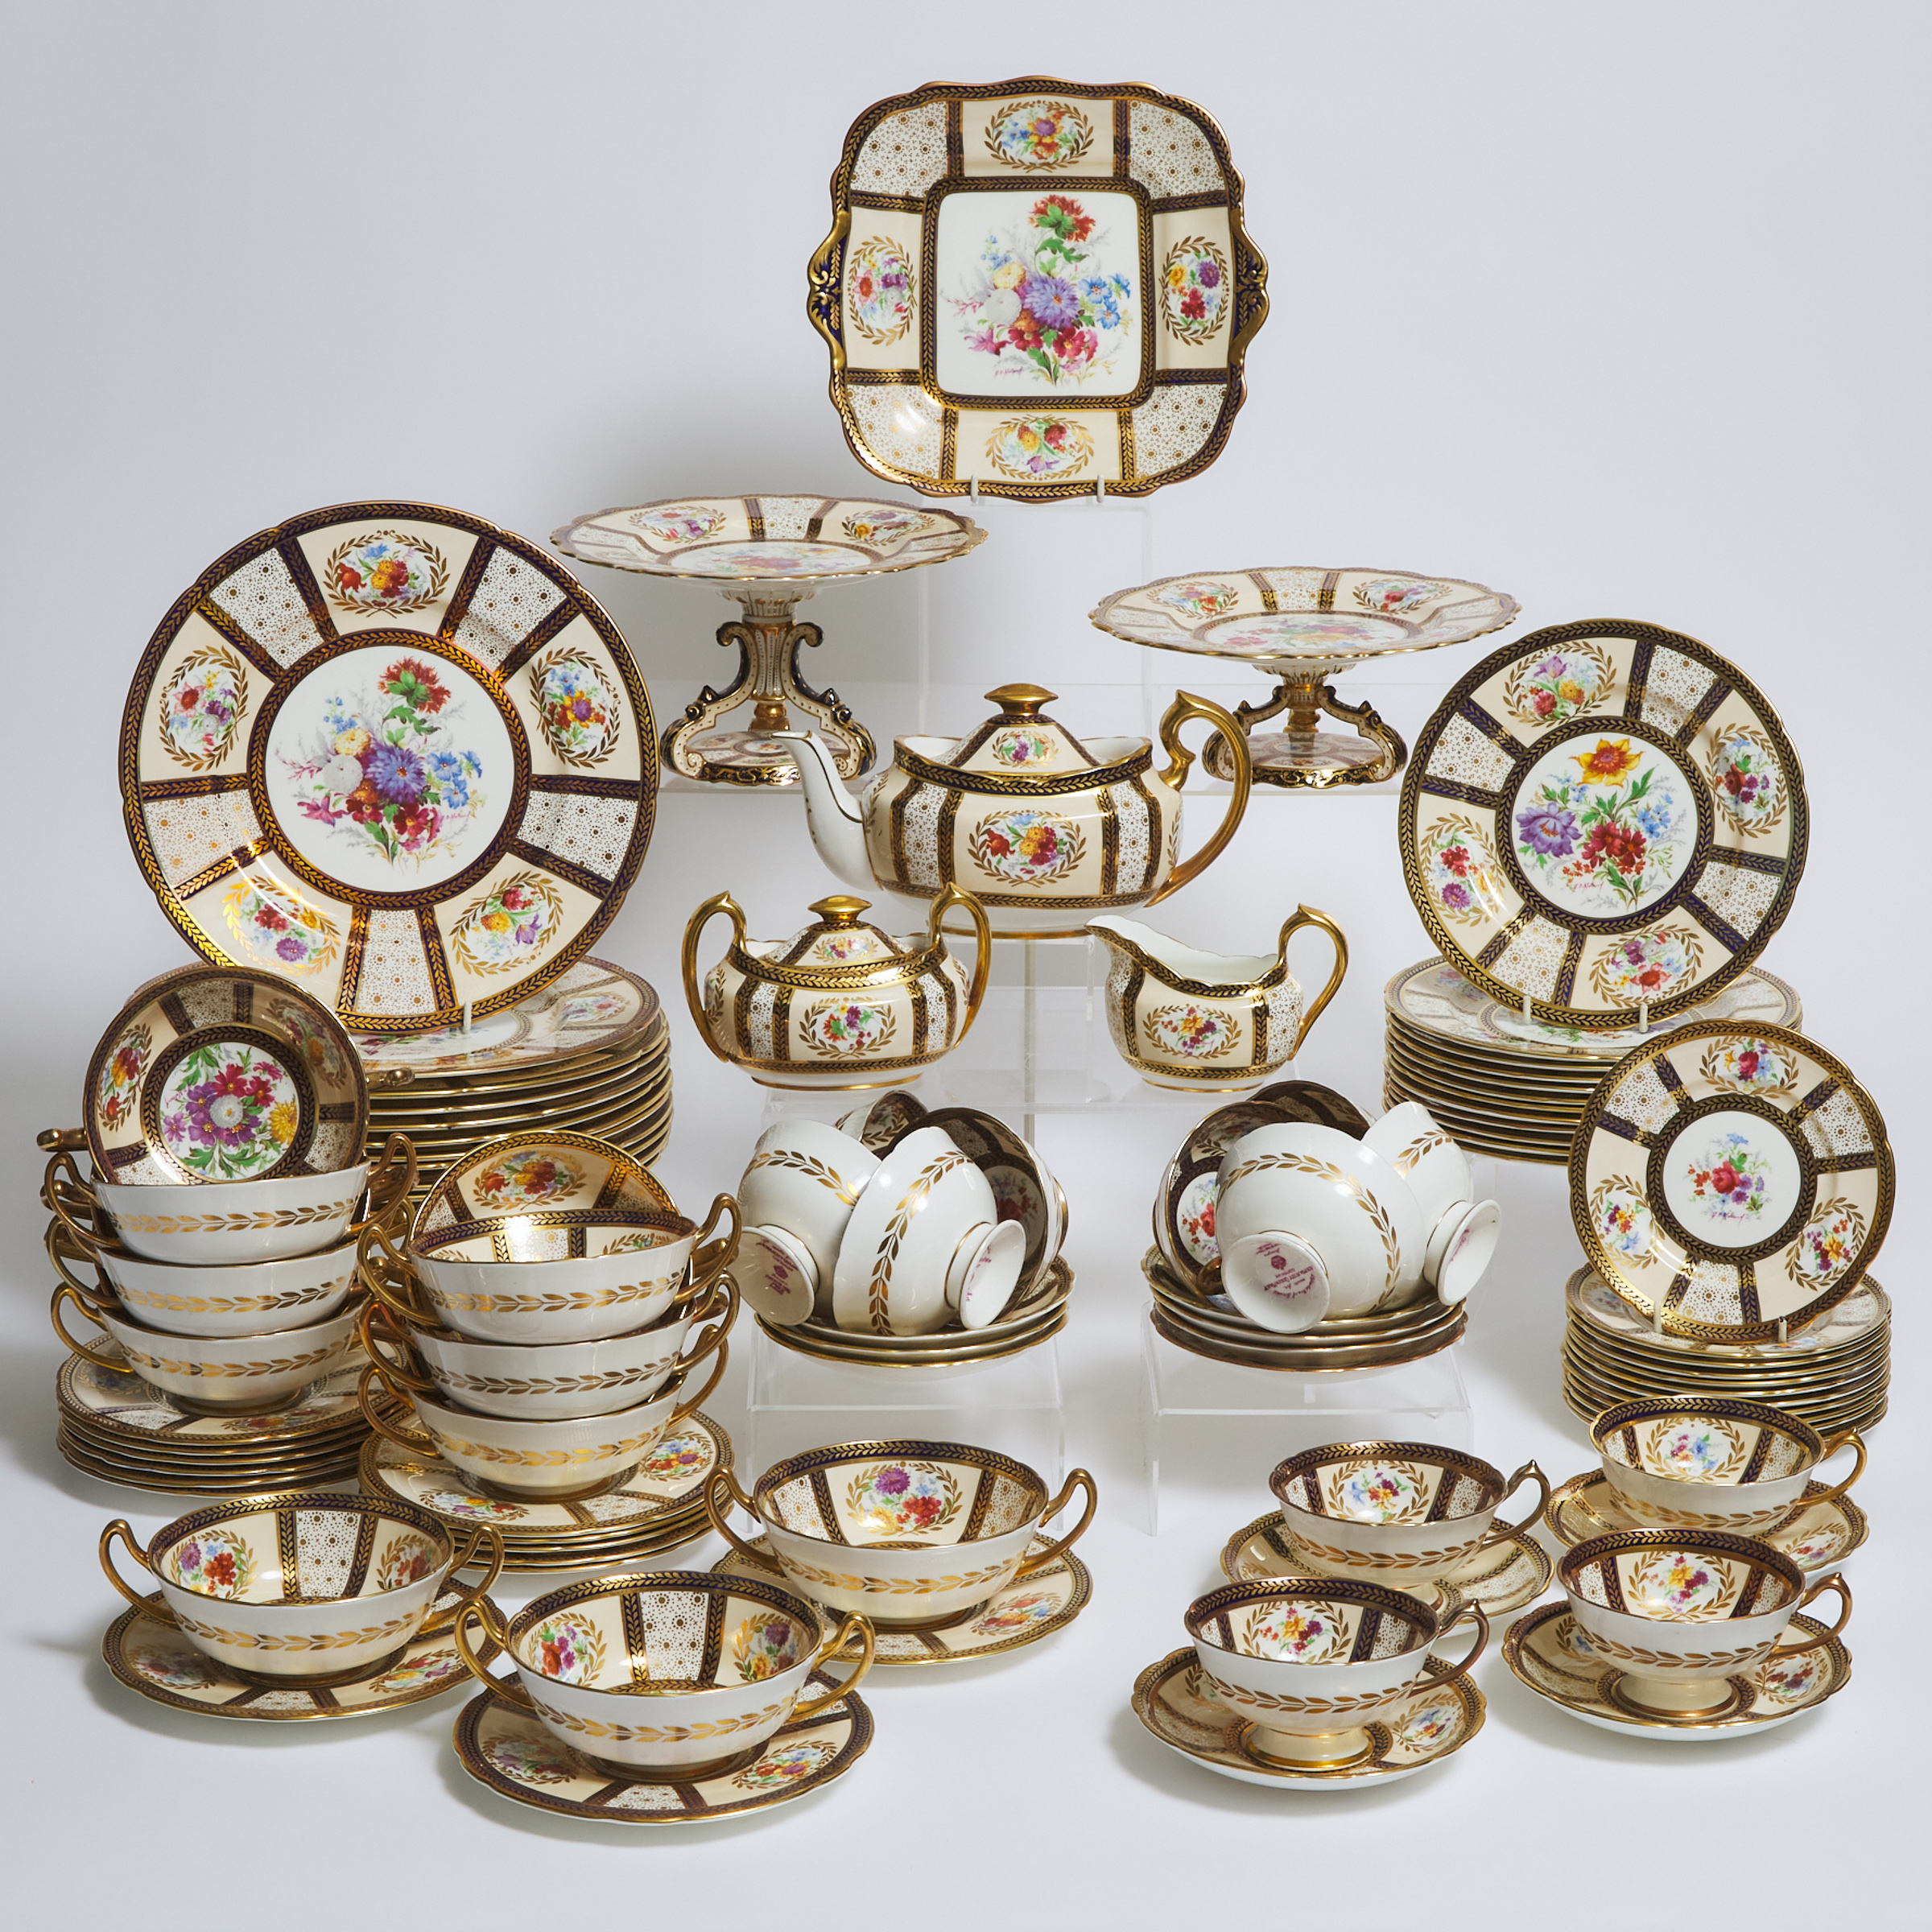 Royal Paragon 'Reproduction of Service made for Her Majesty Queen Mary' Tea Service, 20th century